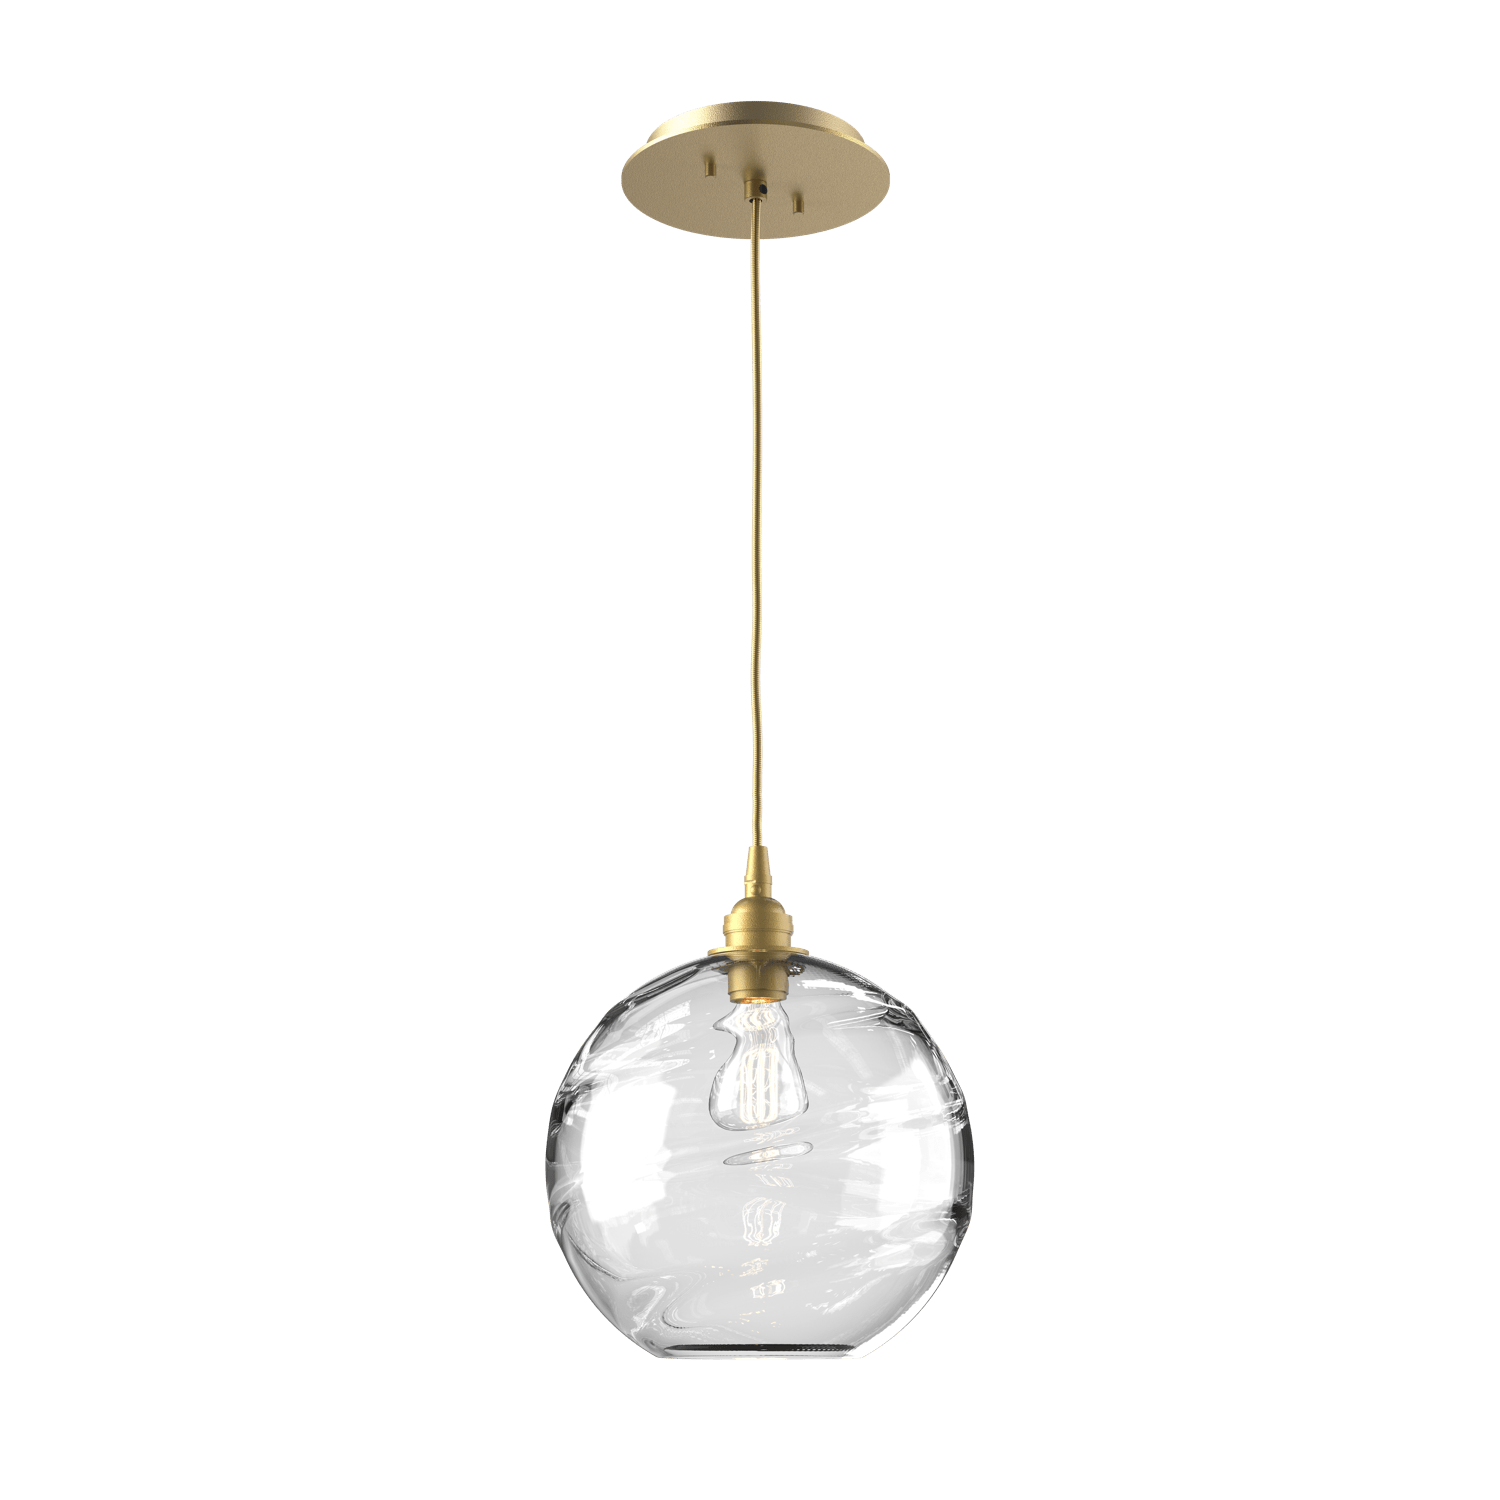 LAB0047-01-GB-OC-Hammerton-Studio-Optic-Blown-Glass-Terra-pendant-light-with-gilded-brass-finish-and-optic-clear-blown-glass-shades-and-incandescent-lamping